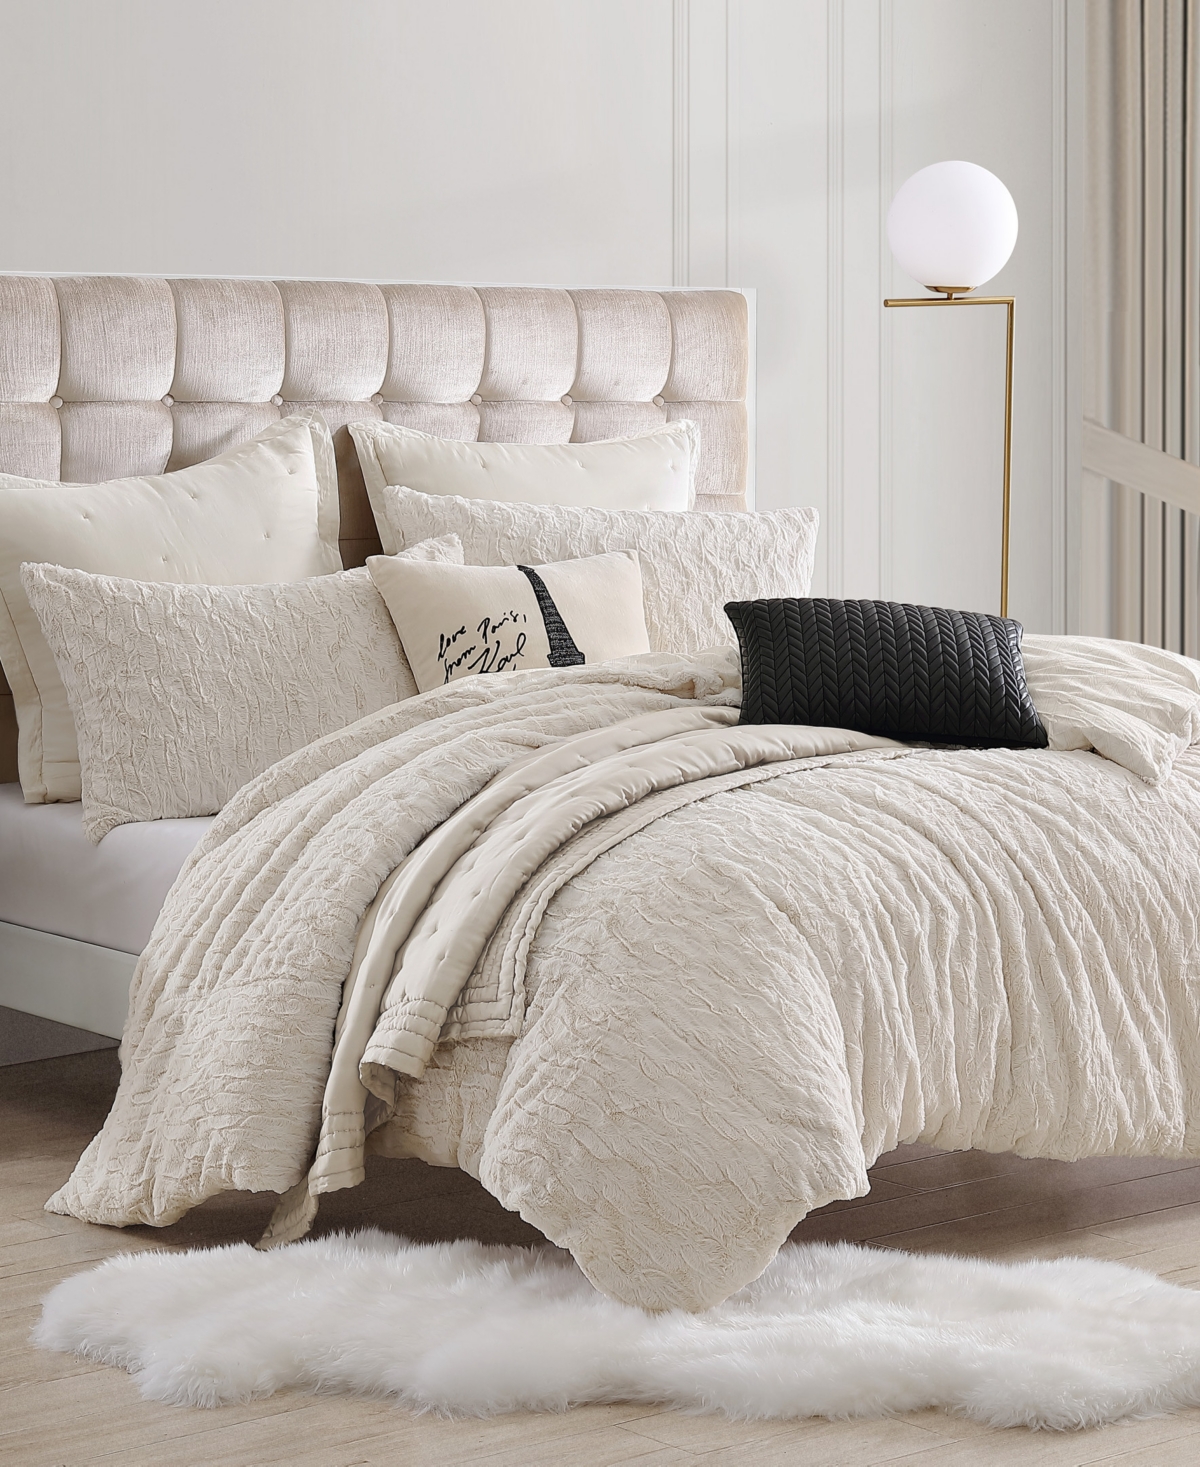 Karl Lagerfeld Soft And Warm Heavenly 3 Piece Comforter Set, Full/queen In Ivory